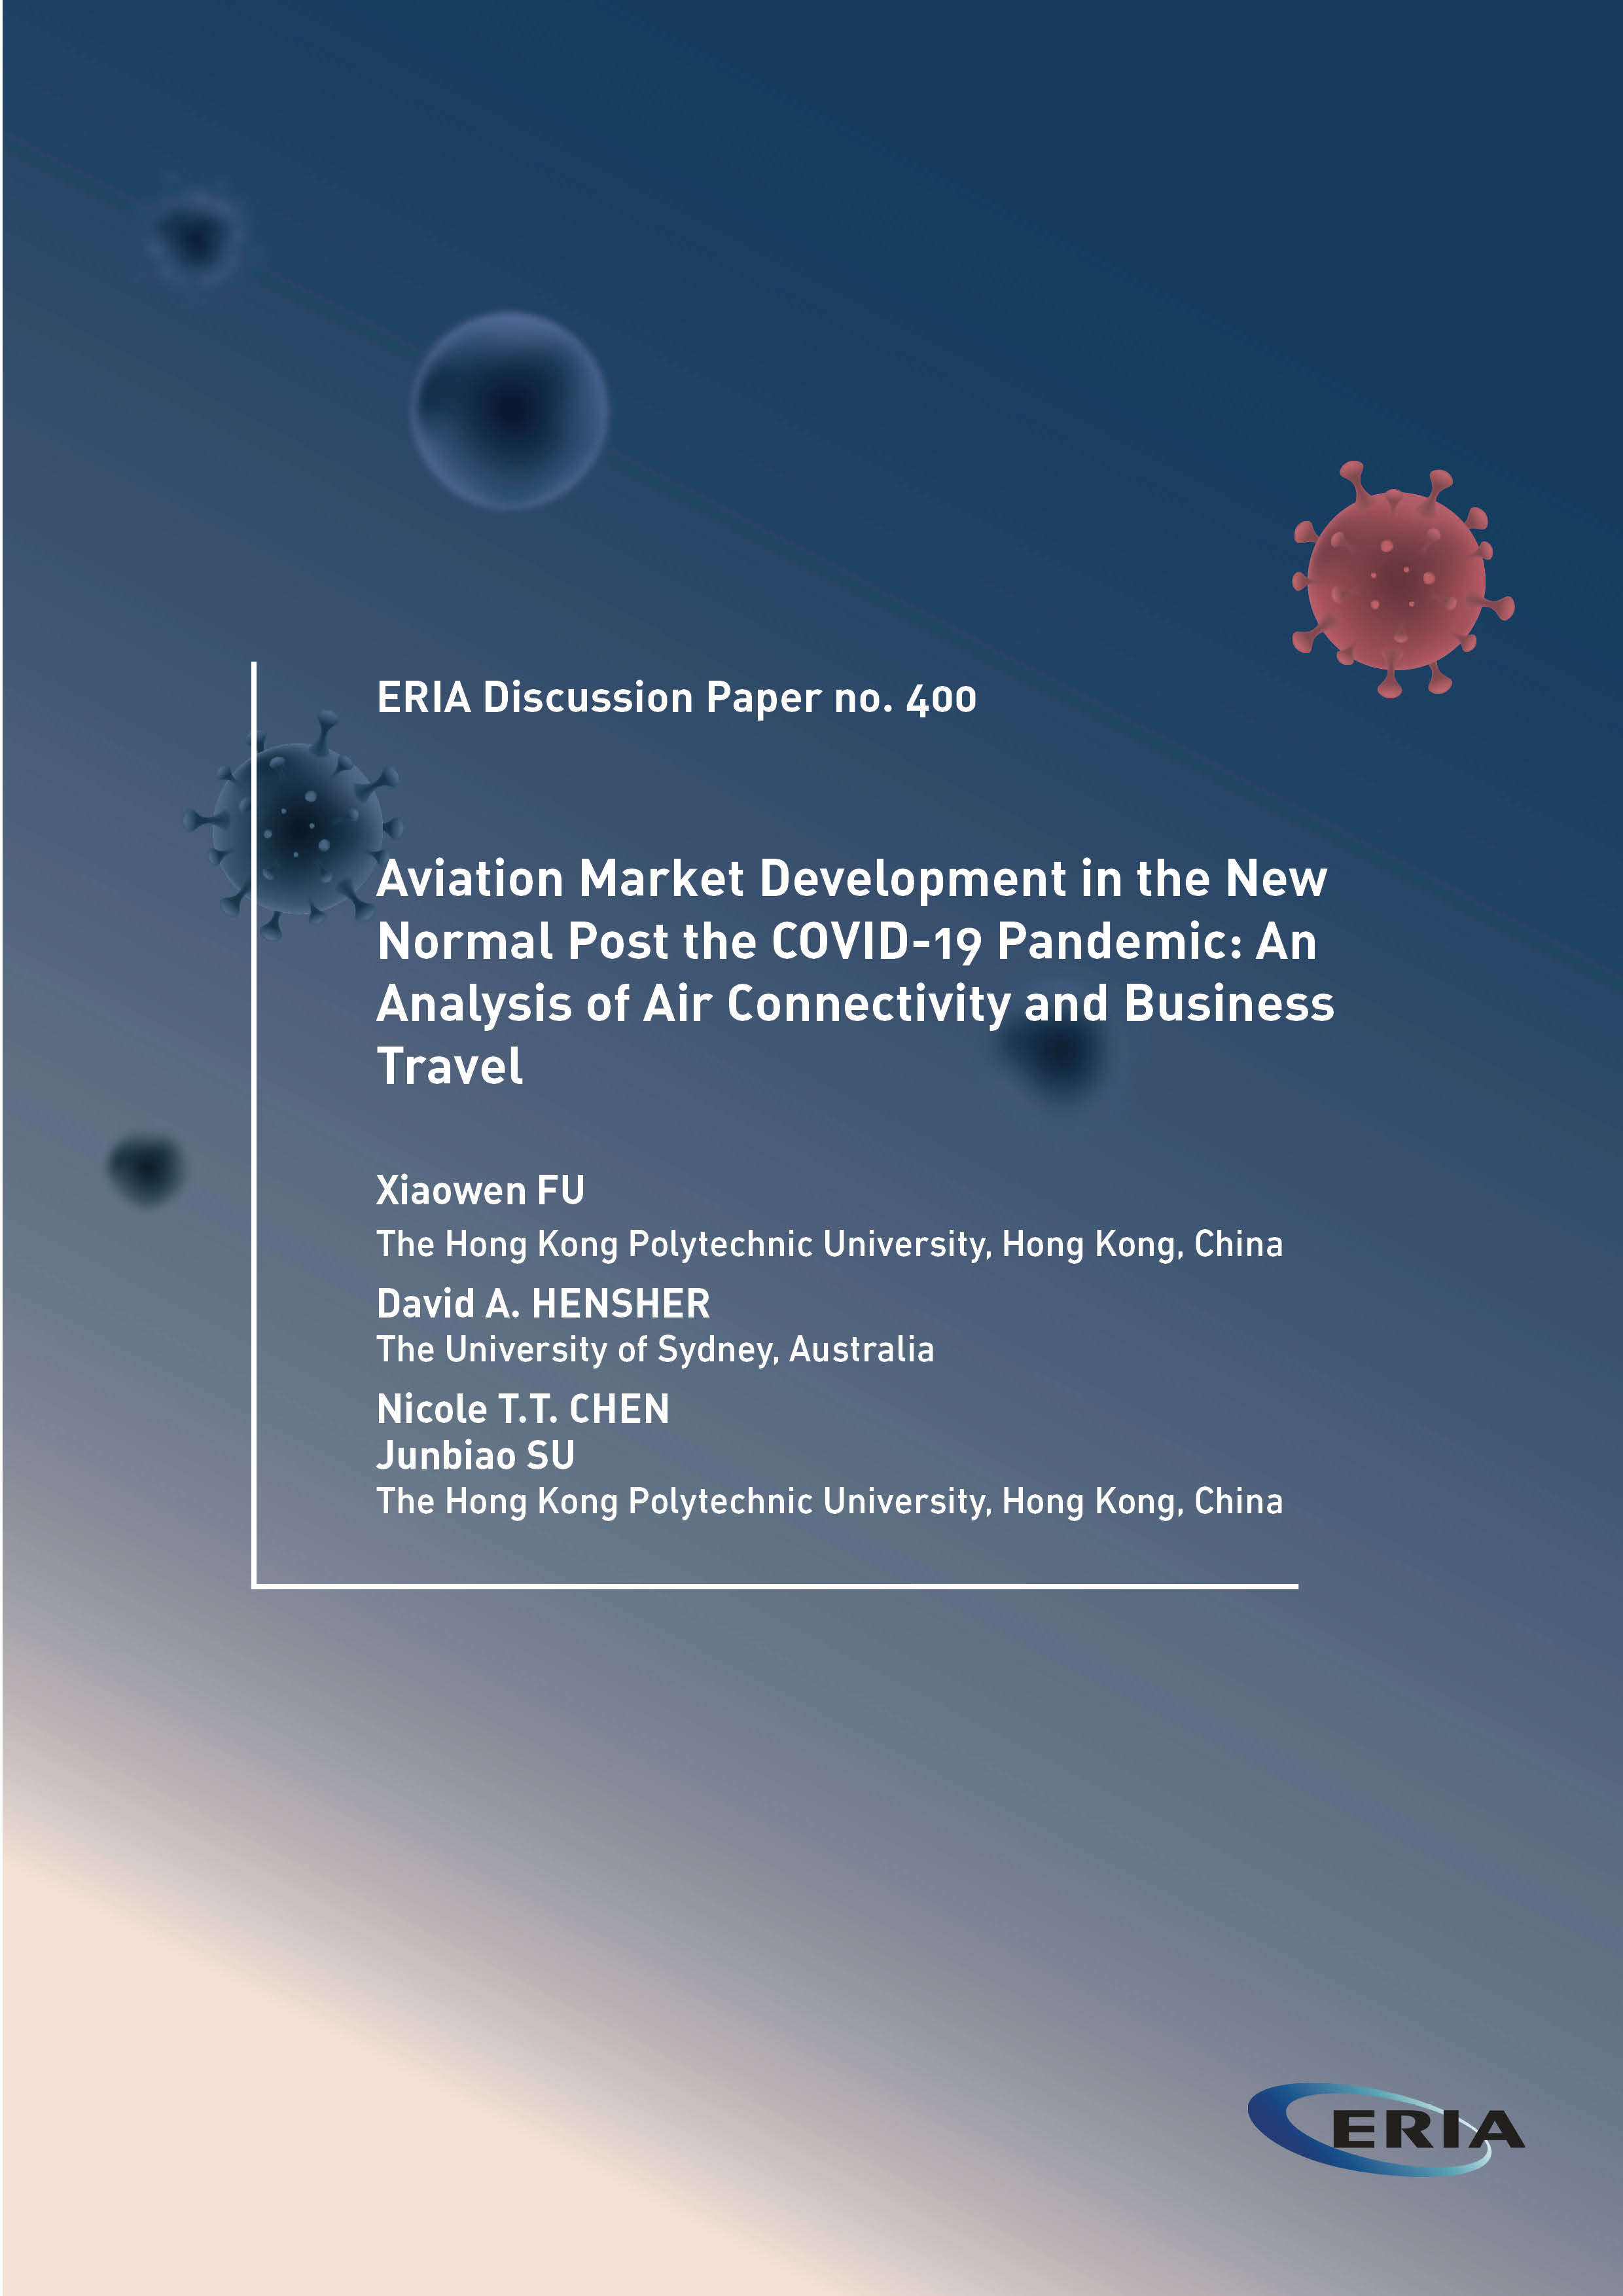 Aviation Market Development in the New Normal Post the COVID-19 Pandemic: An Analysis of Air Connectivity and Business Travel